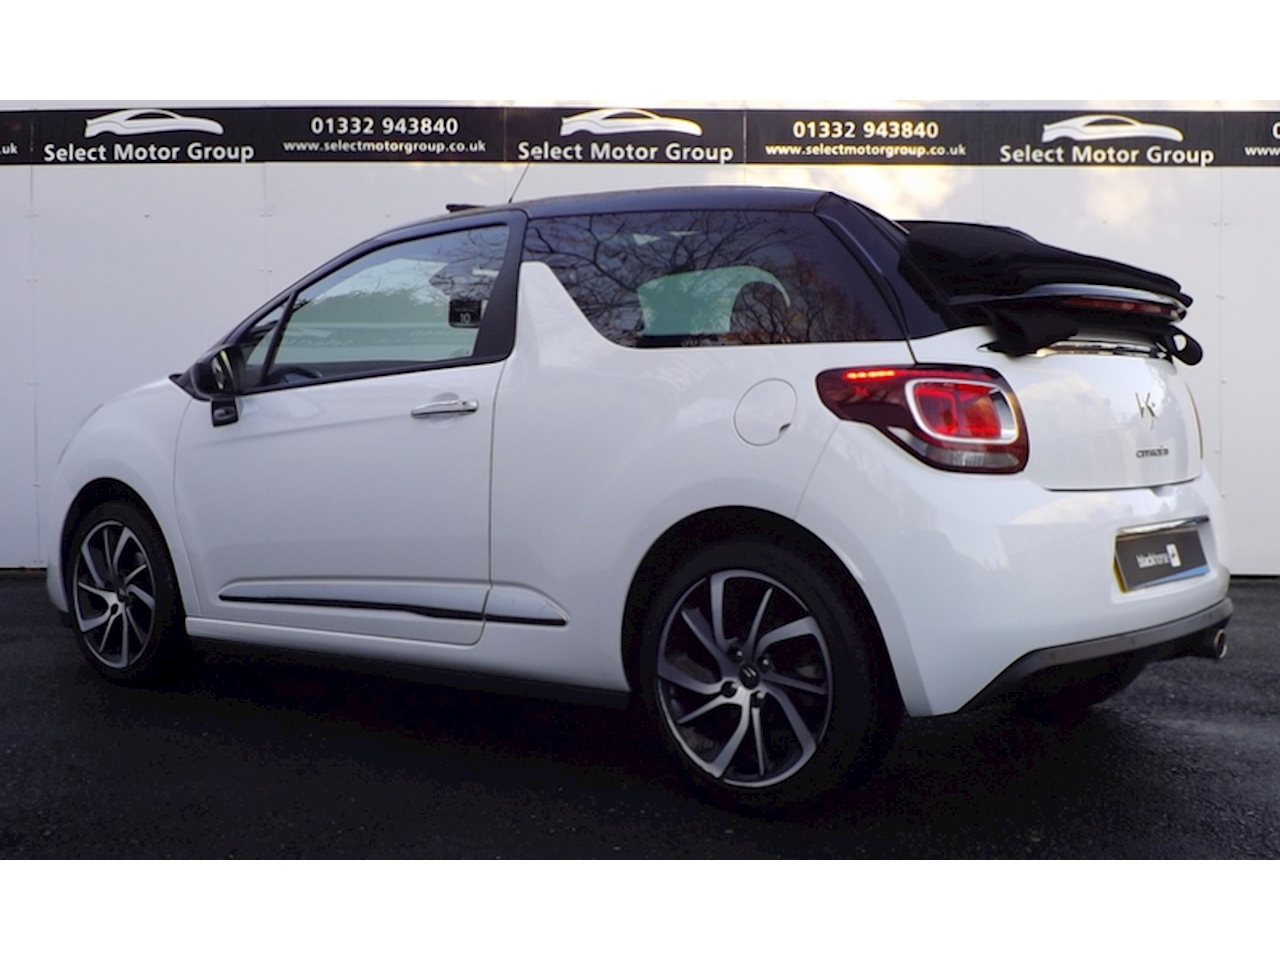 Ds3 Ds3 1.6 Dstyle + Auto Convertible Automatic Petrol